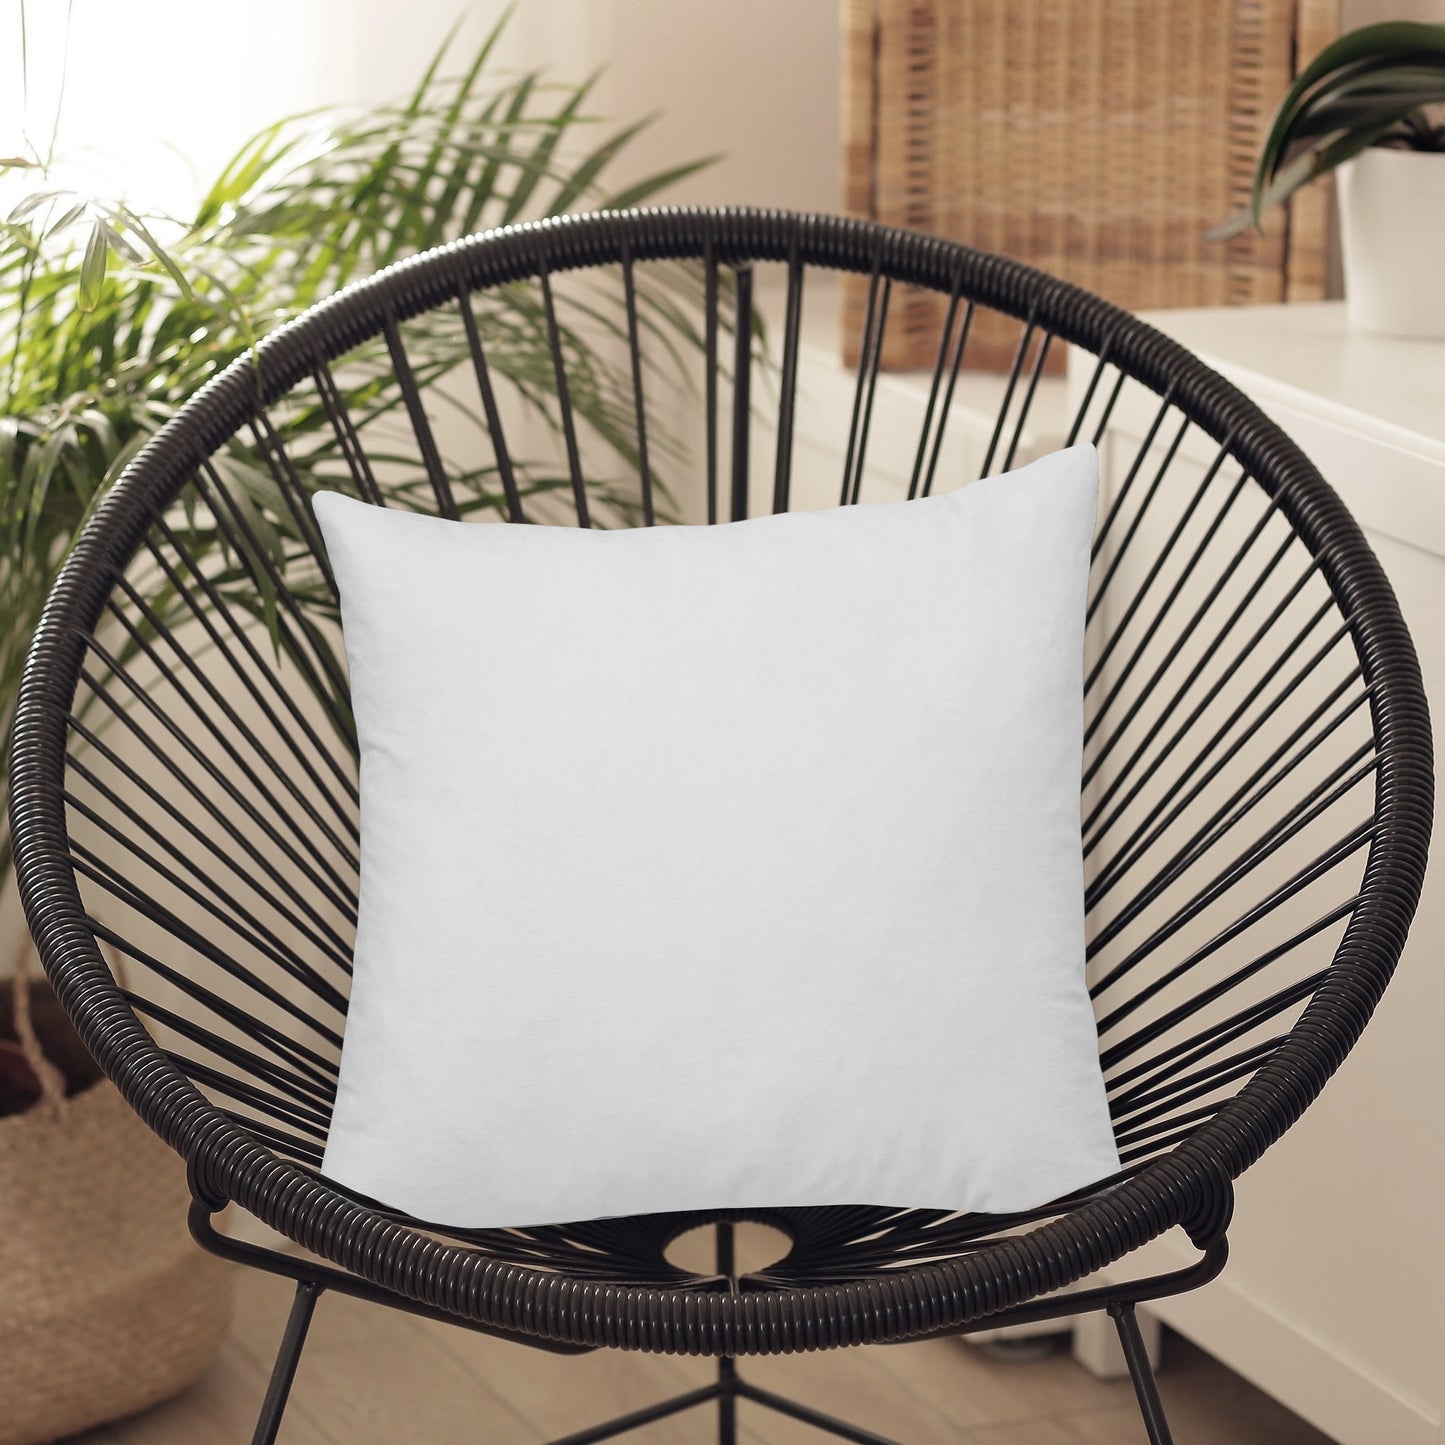 Indoor and outdoor stain-resistant cushion with stain-resistant filling Levante 103 50x50 cm